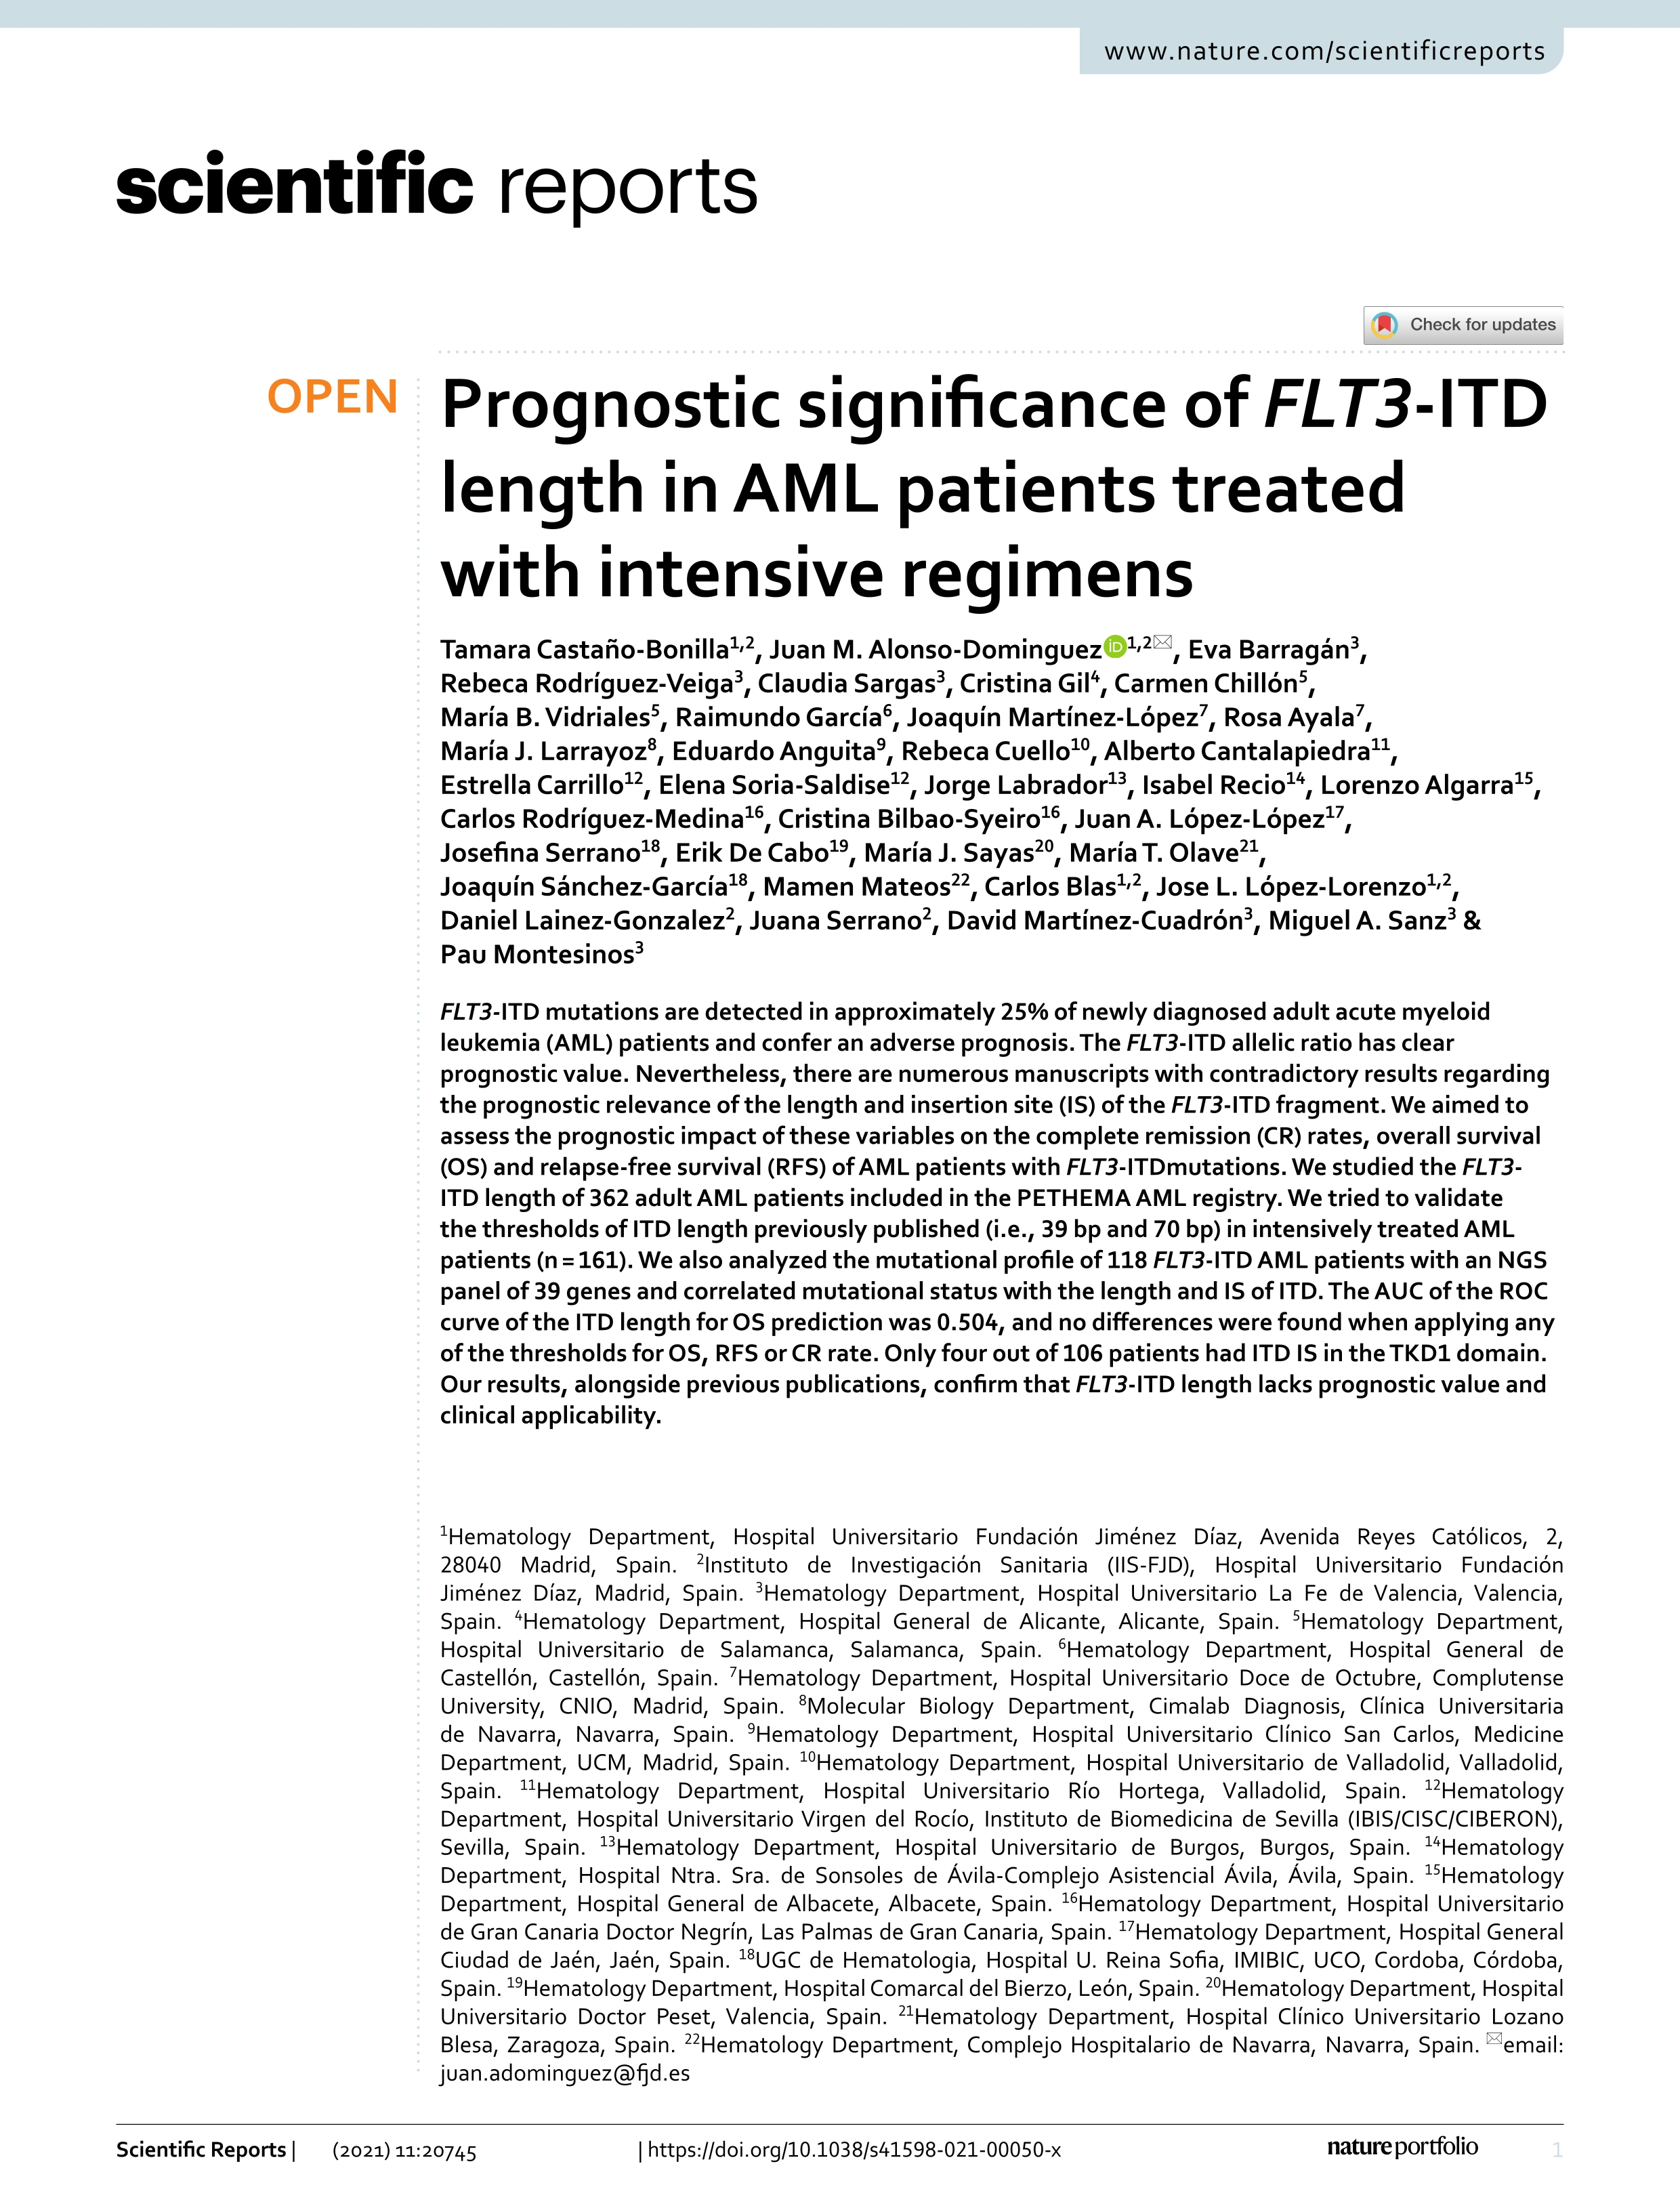 Prognostic significance of FLT3-ITD length in AML patients treated with intensive regimens